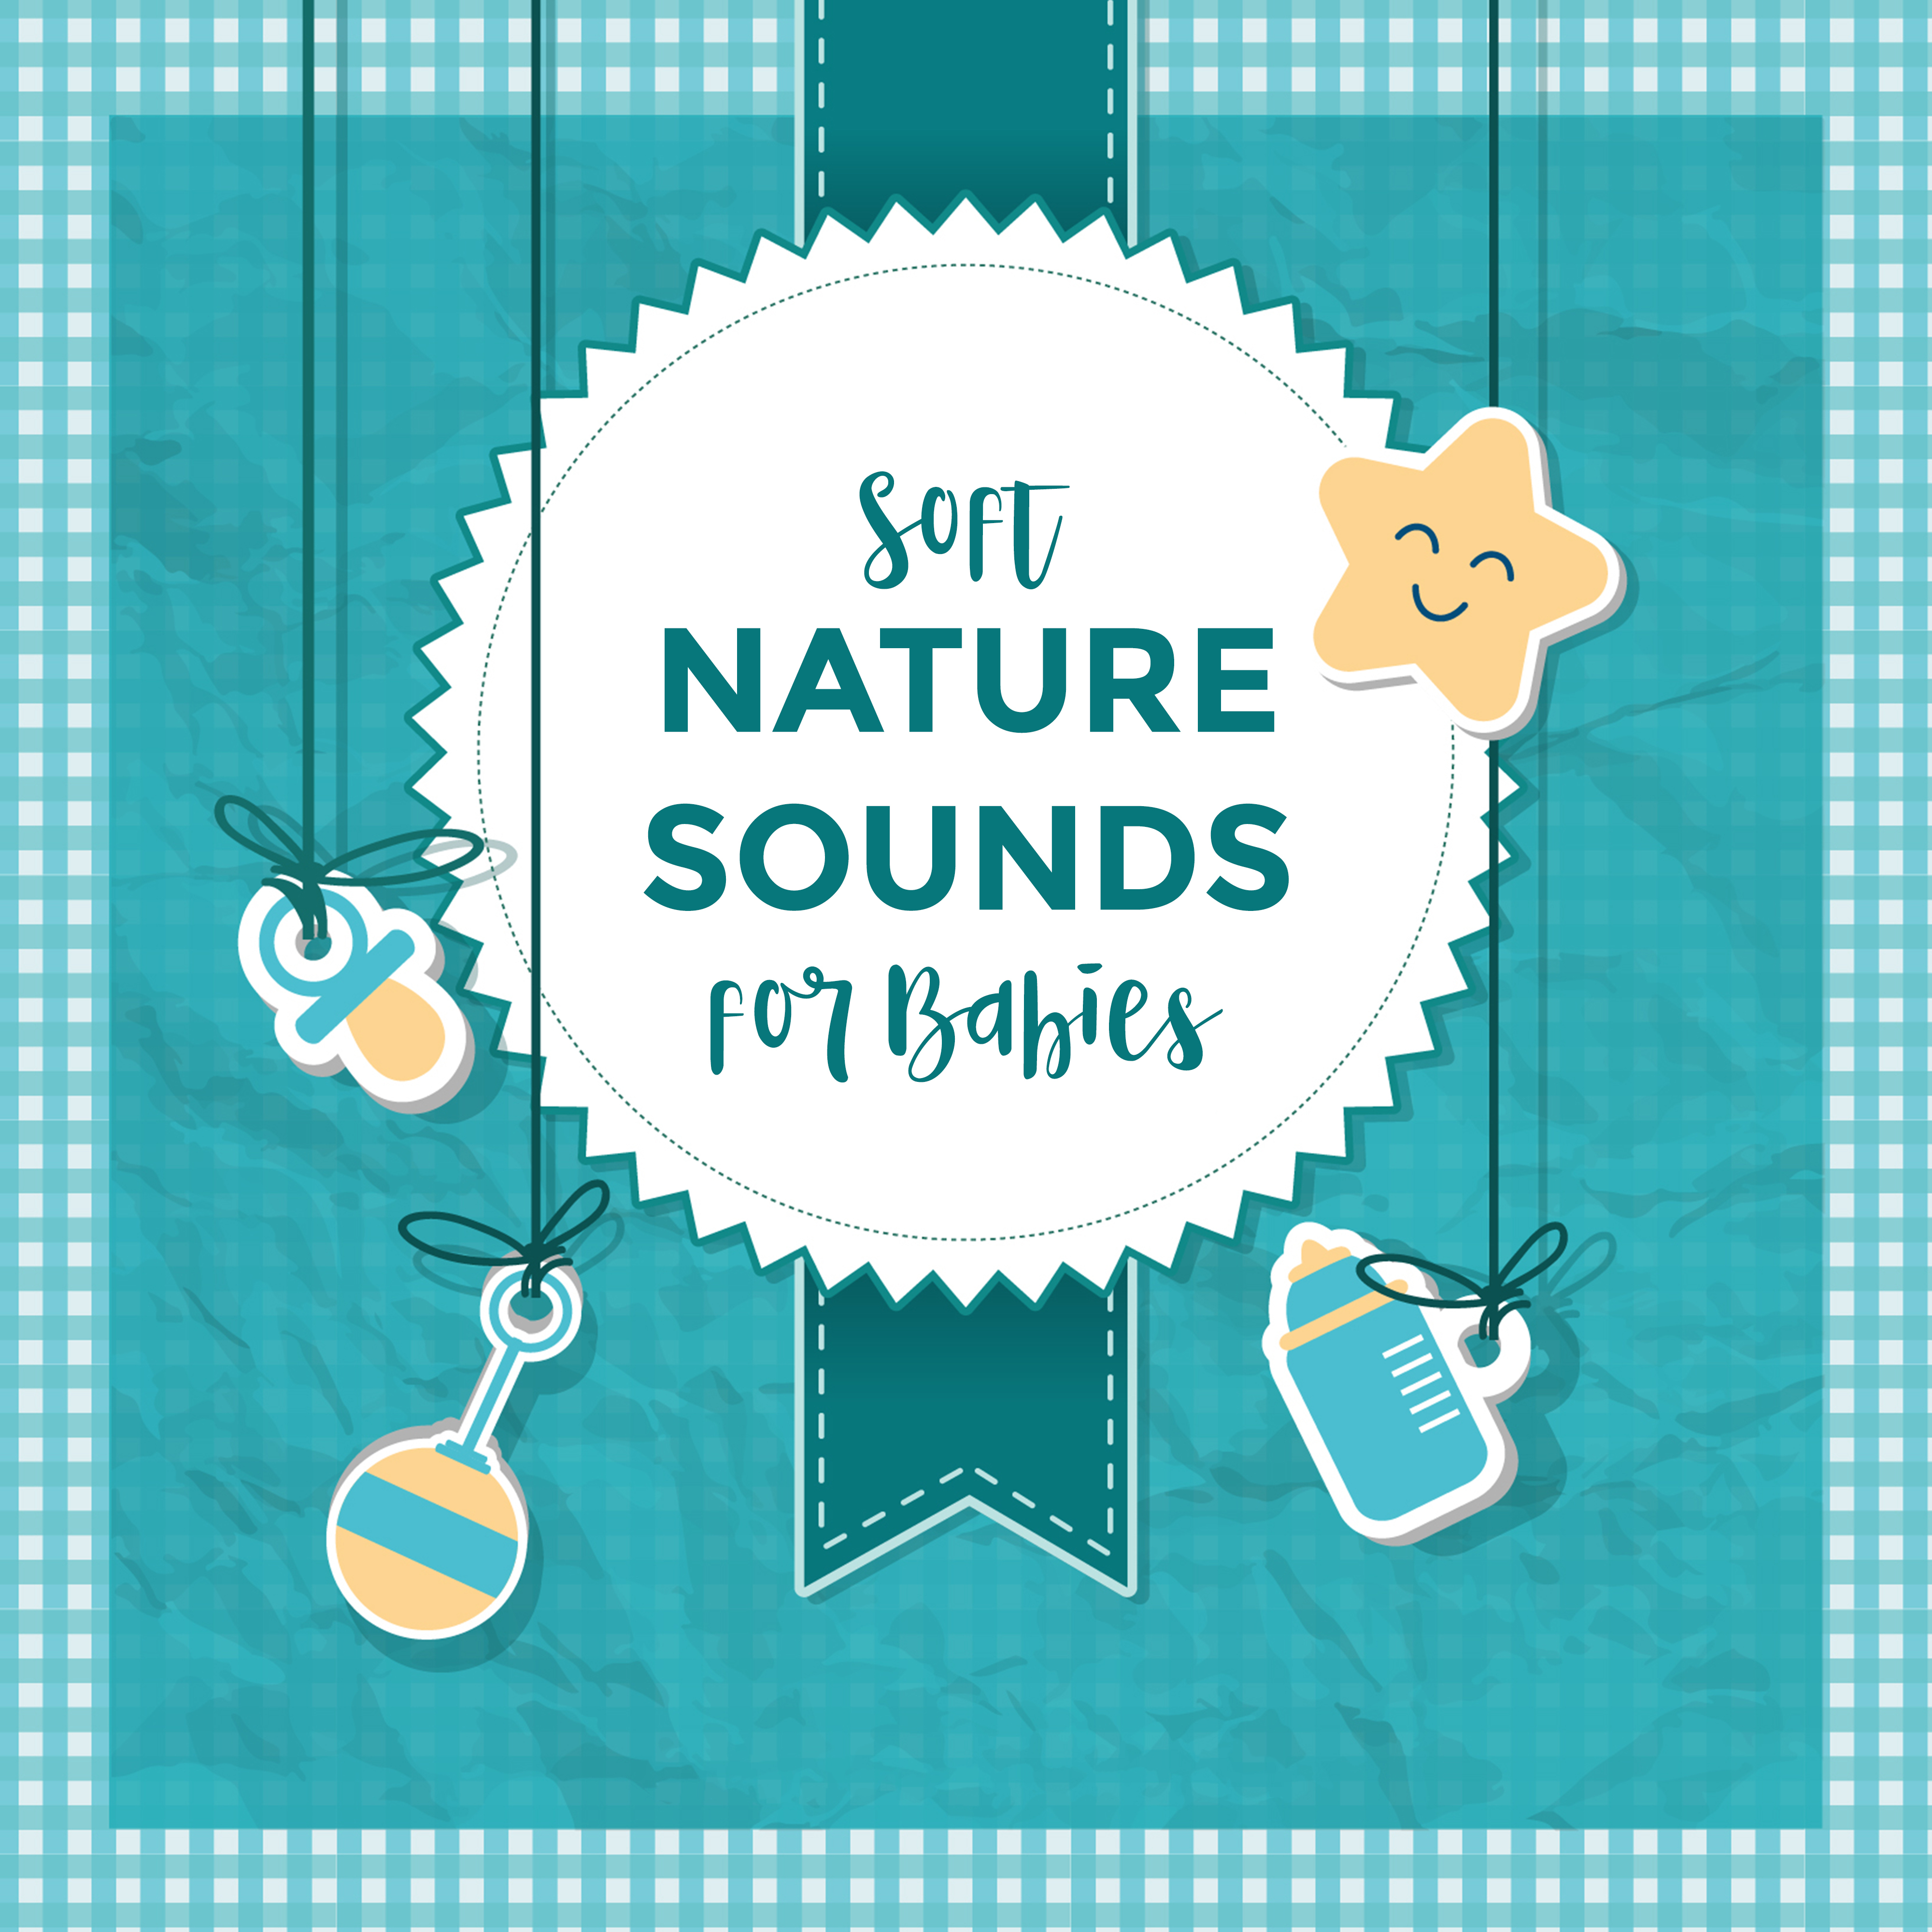 Soft Nature Sounds for Babies